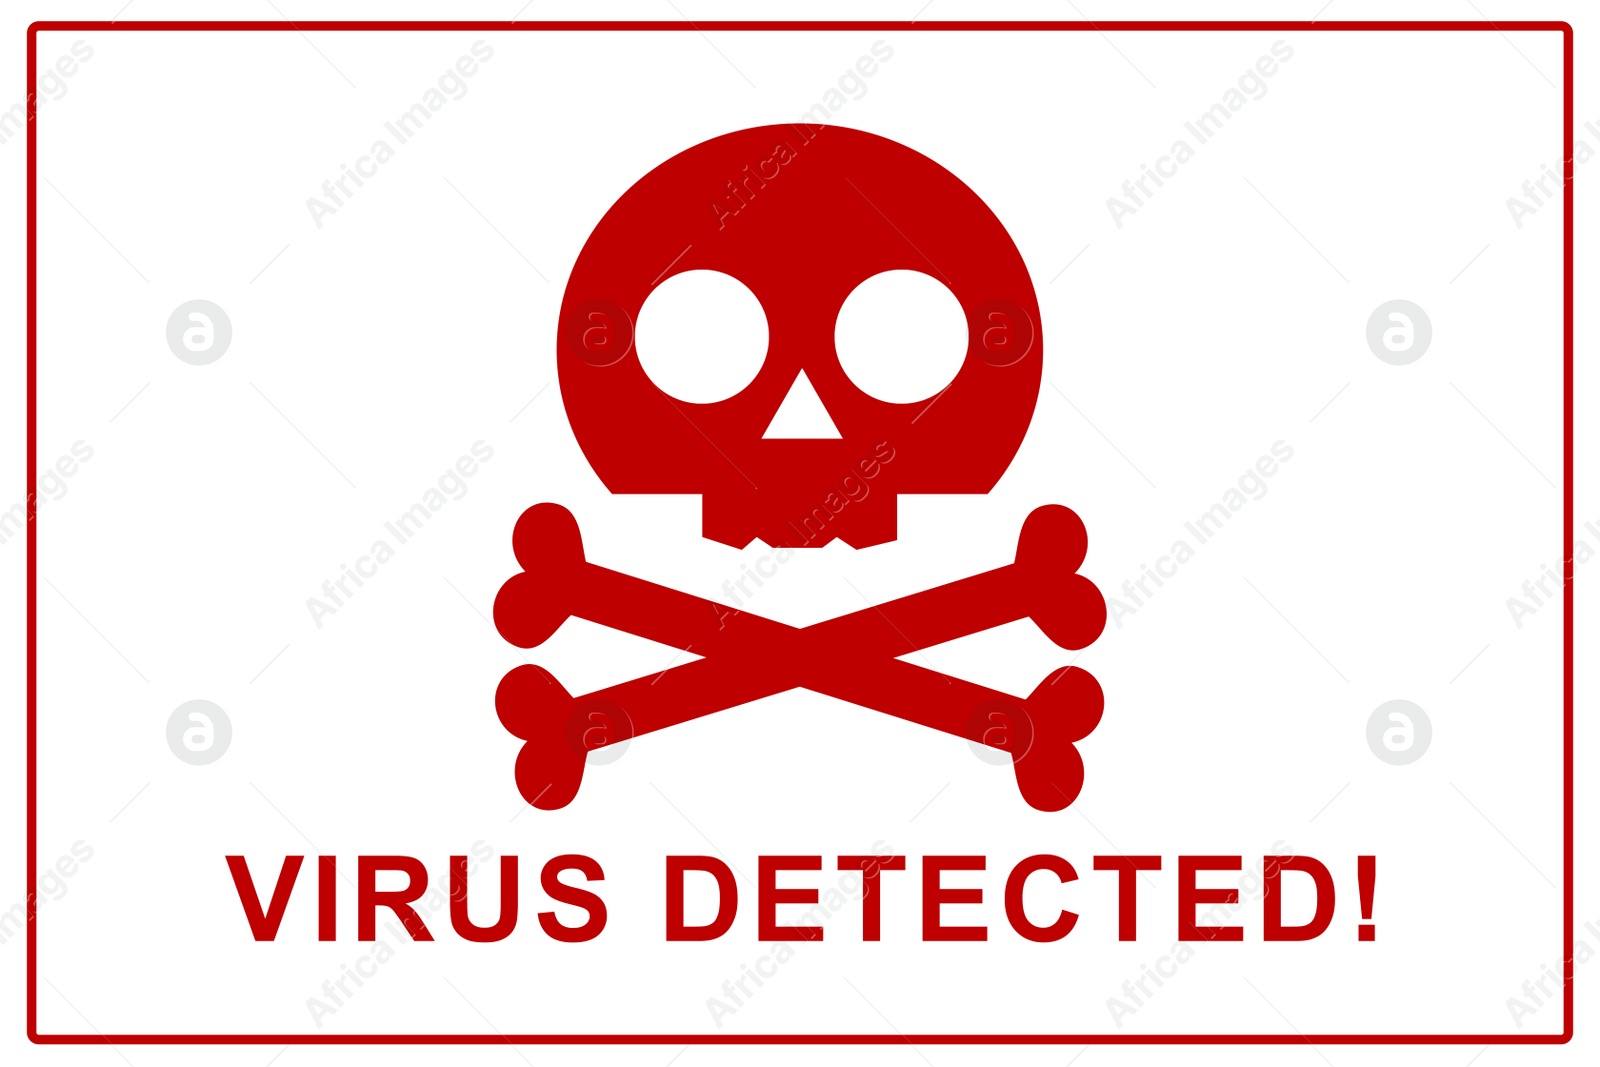 Illustration of Warning about virus attack to protect information. Illustration